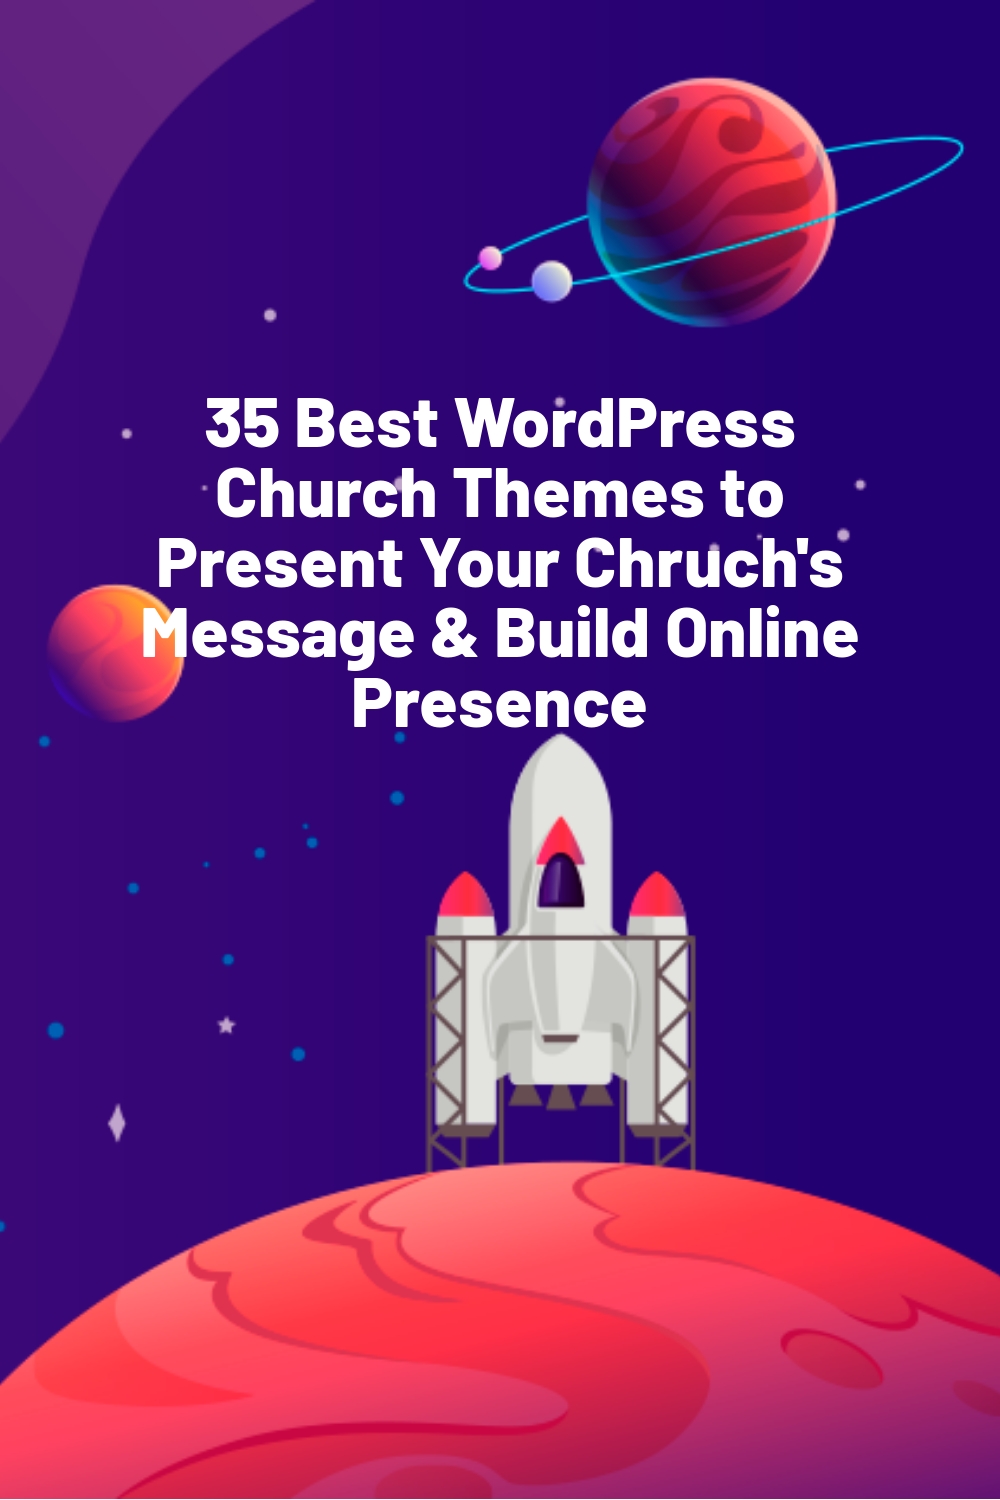 35 Best WordPress Church Themes to Present Your Chruch’s Message & Build Online Presence